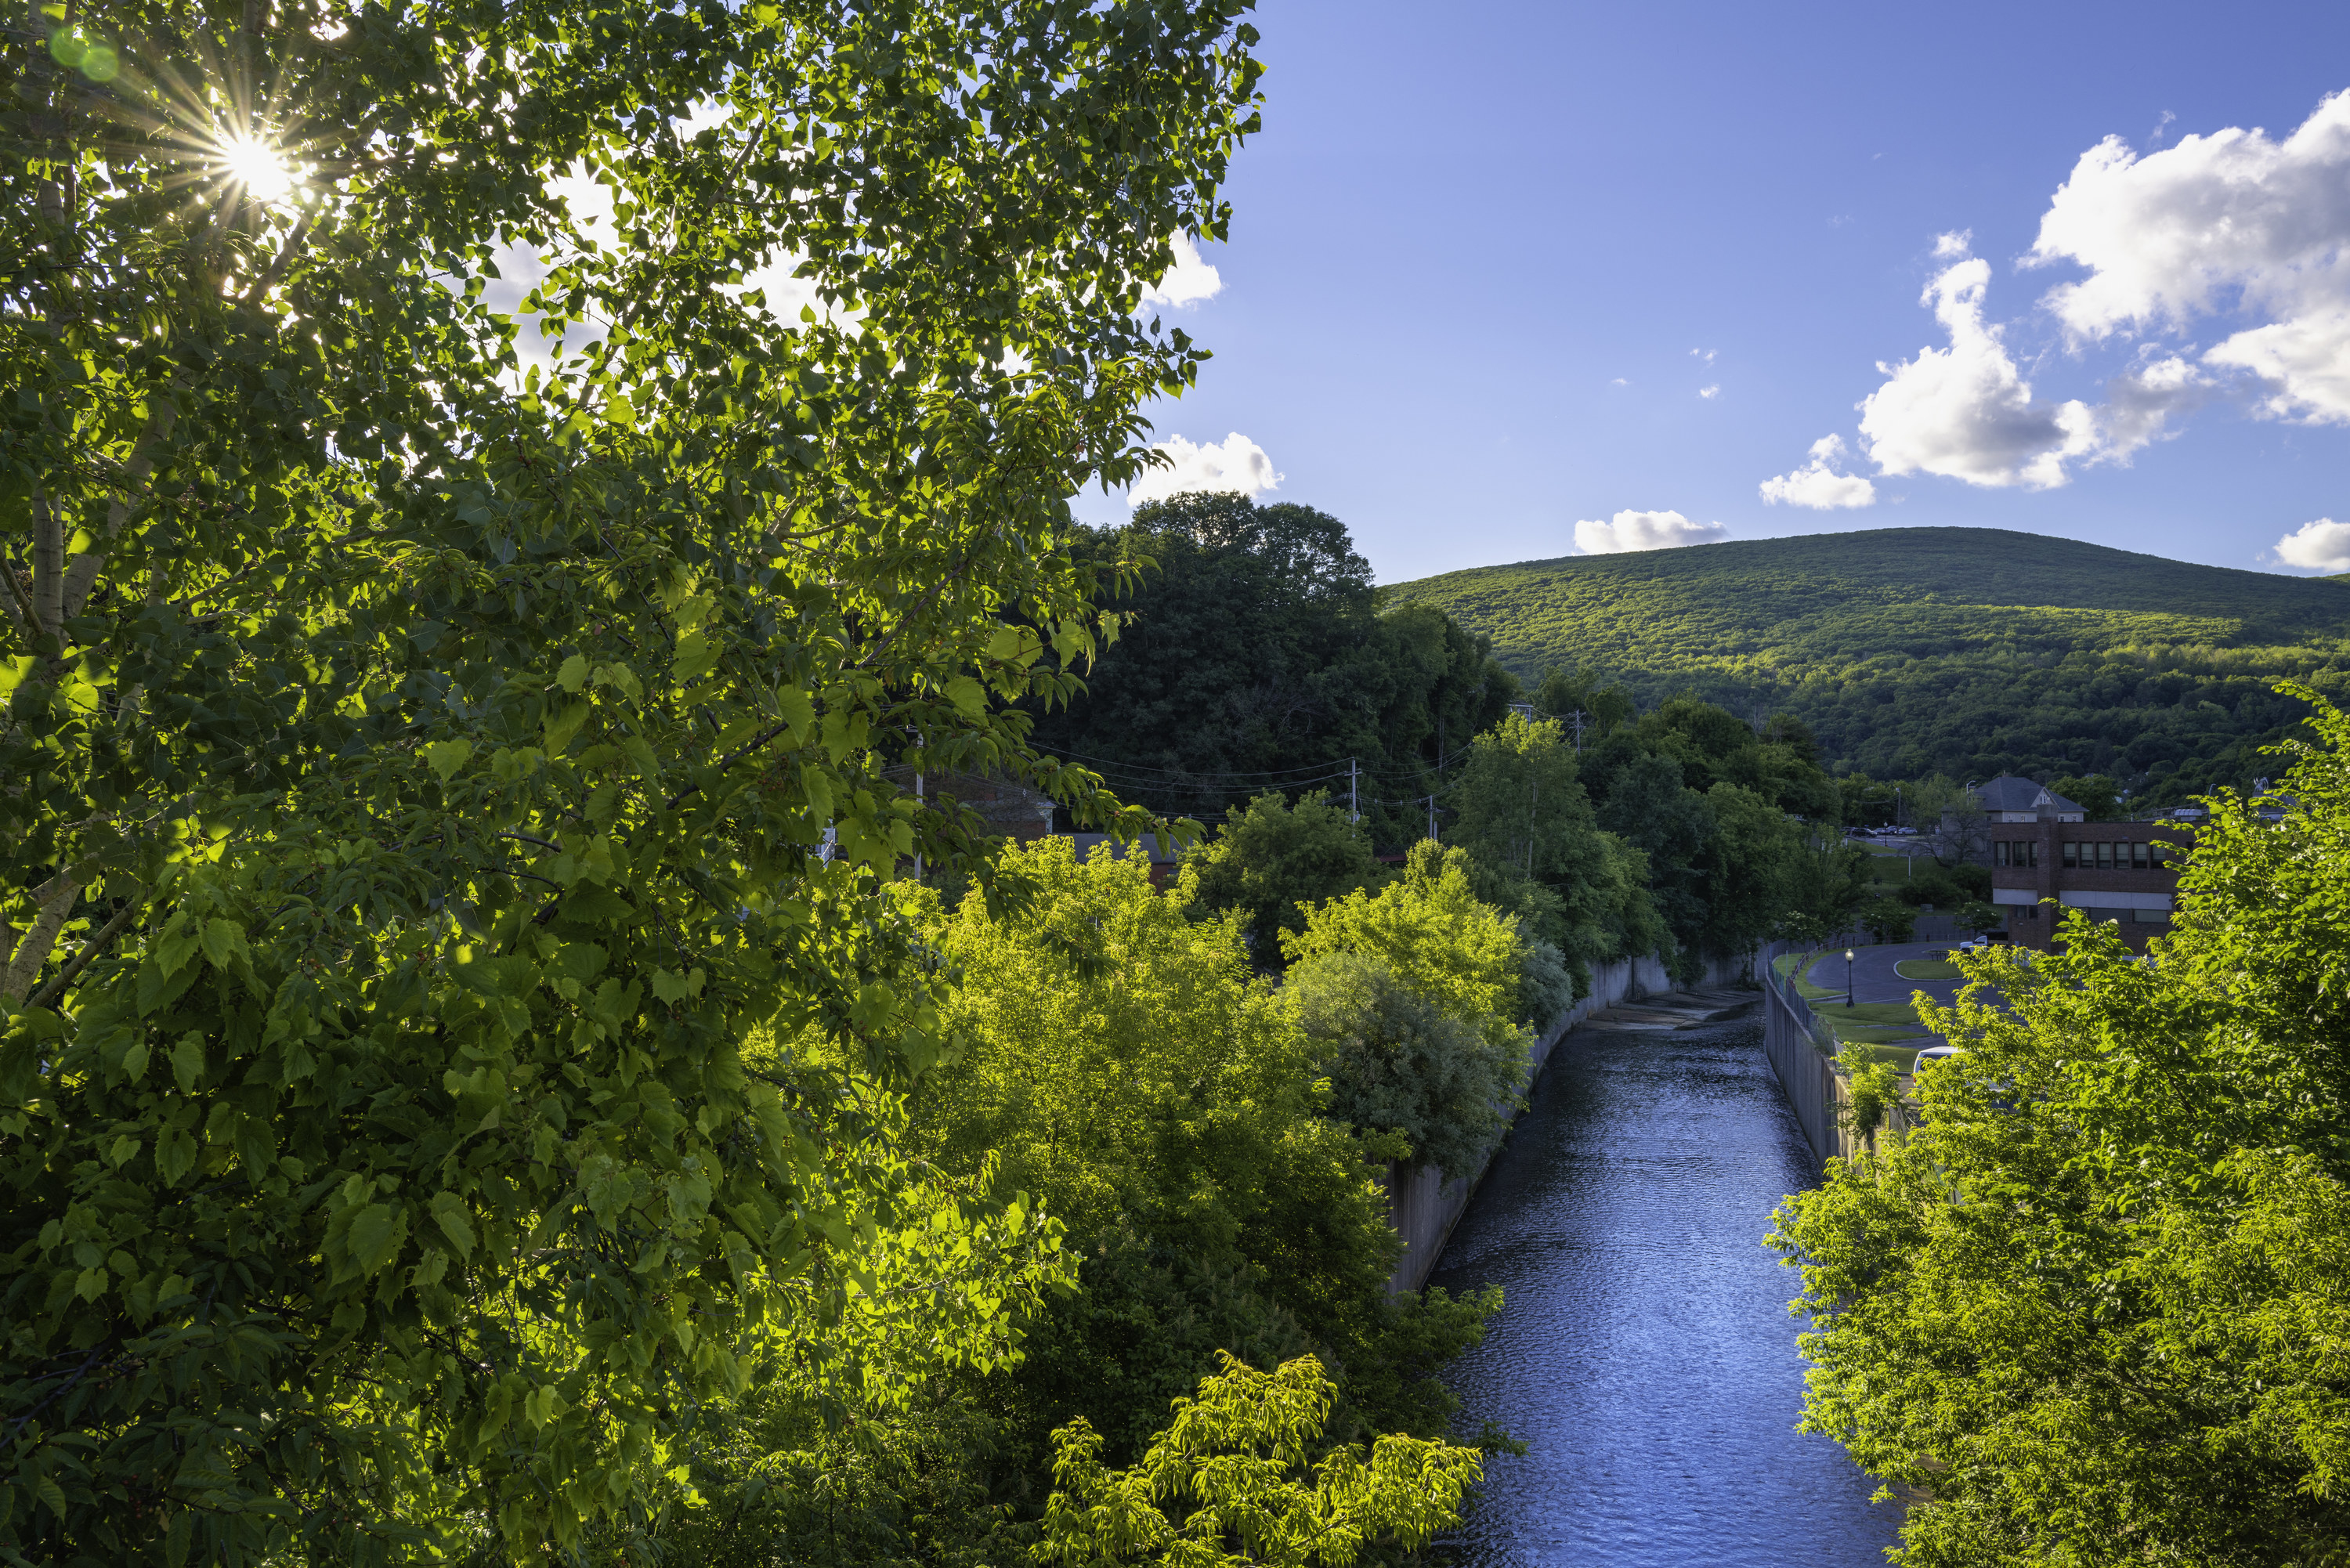 Sunset landscape over the Hoosic River with the view of Green Mountain in North Adams, Massachusetts.